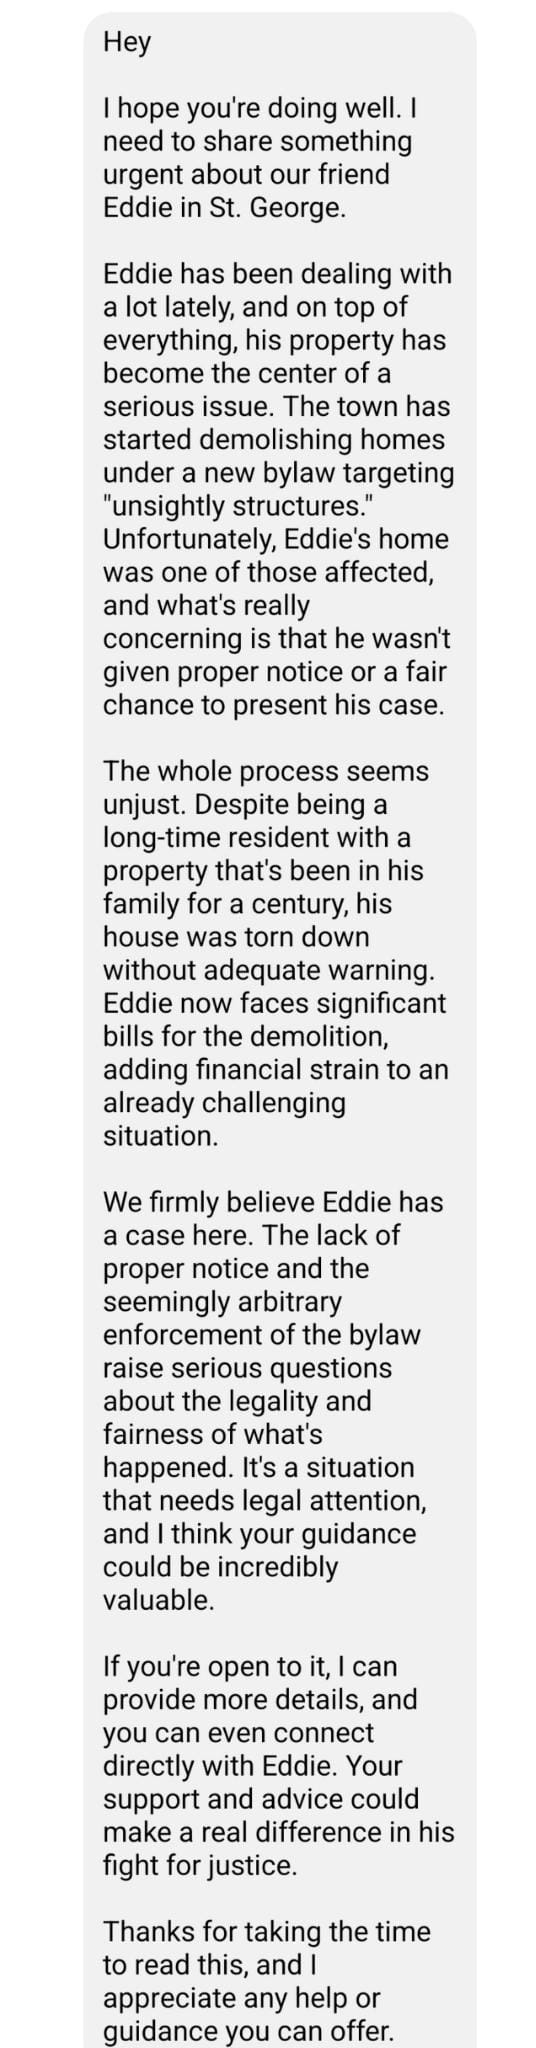 May be an image of text that says 'Hey hope you're doing well. share urgent about friend Eddie George. been dealing with everything, property has become center serious issue The town has started targeting structures Unfortunately, Eddie's home one those affected, wasn't proper notice chance present his case. whole seems being with property that's been family for century, without adequate bills adding strain already challenging situation. We firmly believe Eddie has case here. The| lack notice seemingly arbitrary bylaw questions legality what's happened situation legal think guidance could incredibly valuable. about details, directly with Eddie. support and advice could make for taking the time Thanks read appreciate'